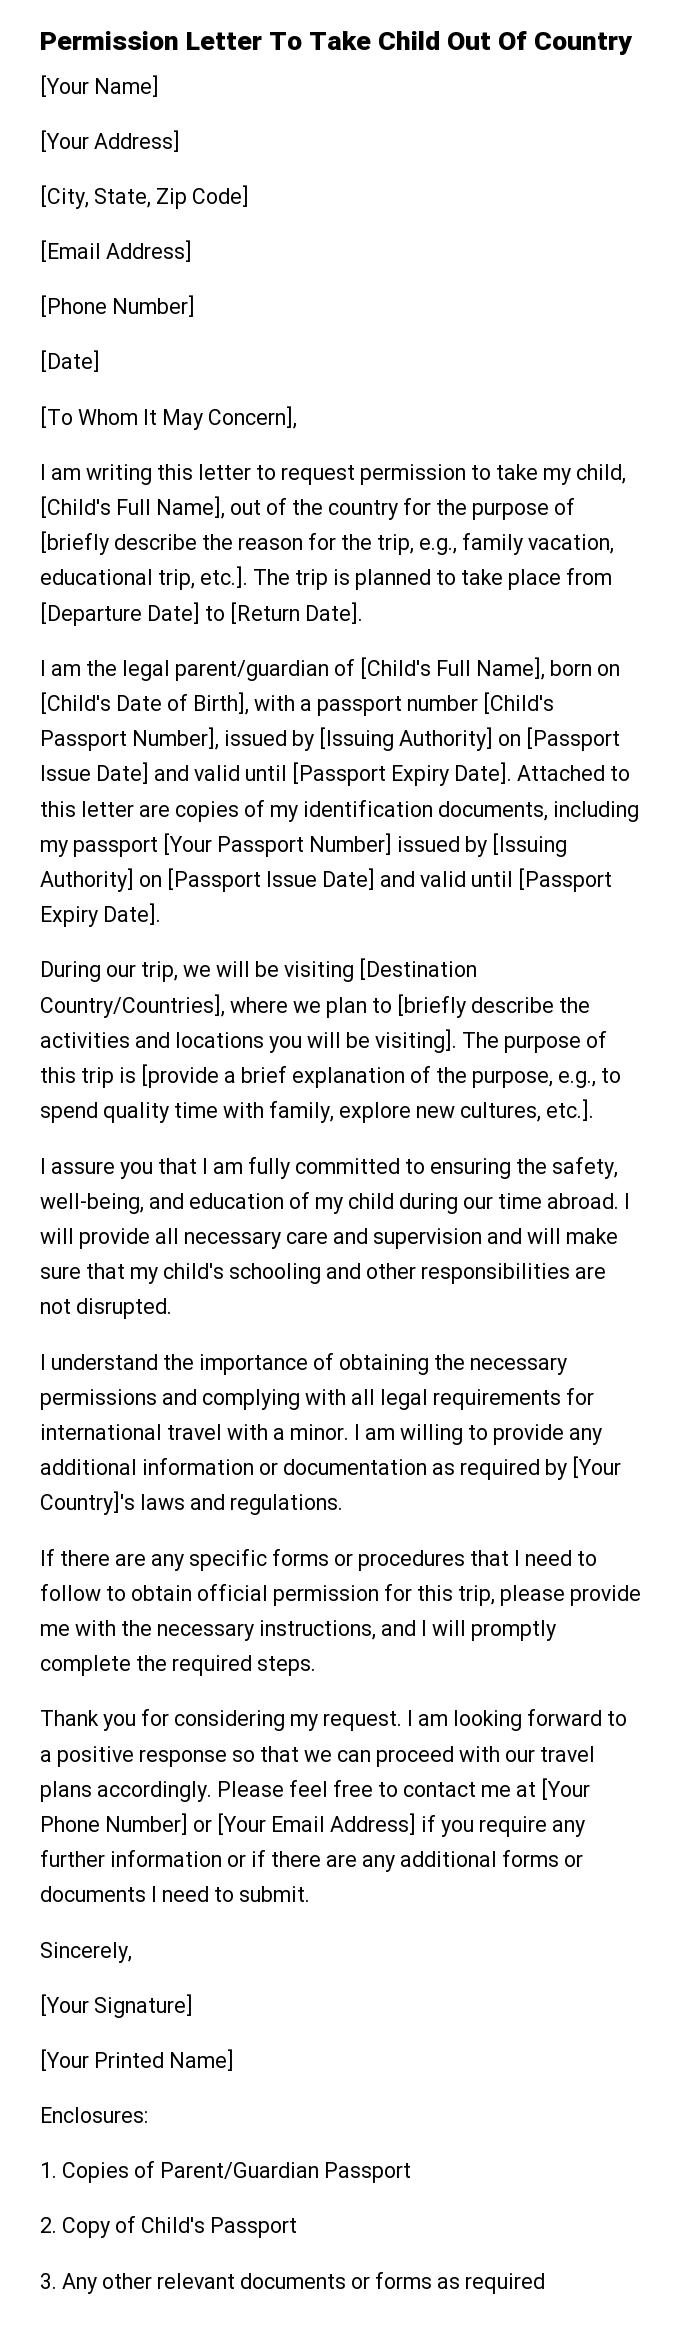 Permission Letter To Take Child Out Of Country